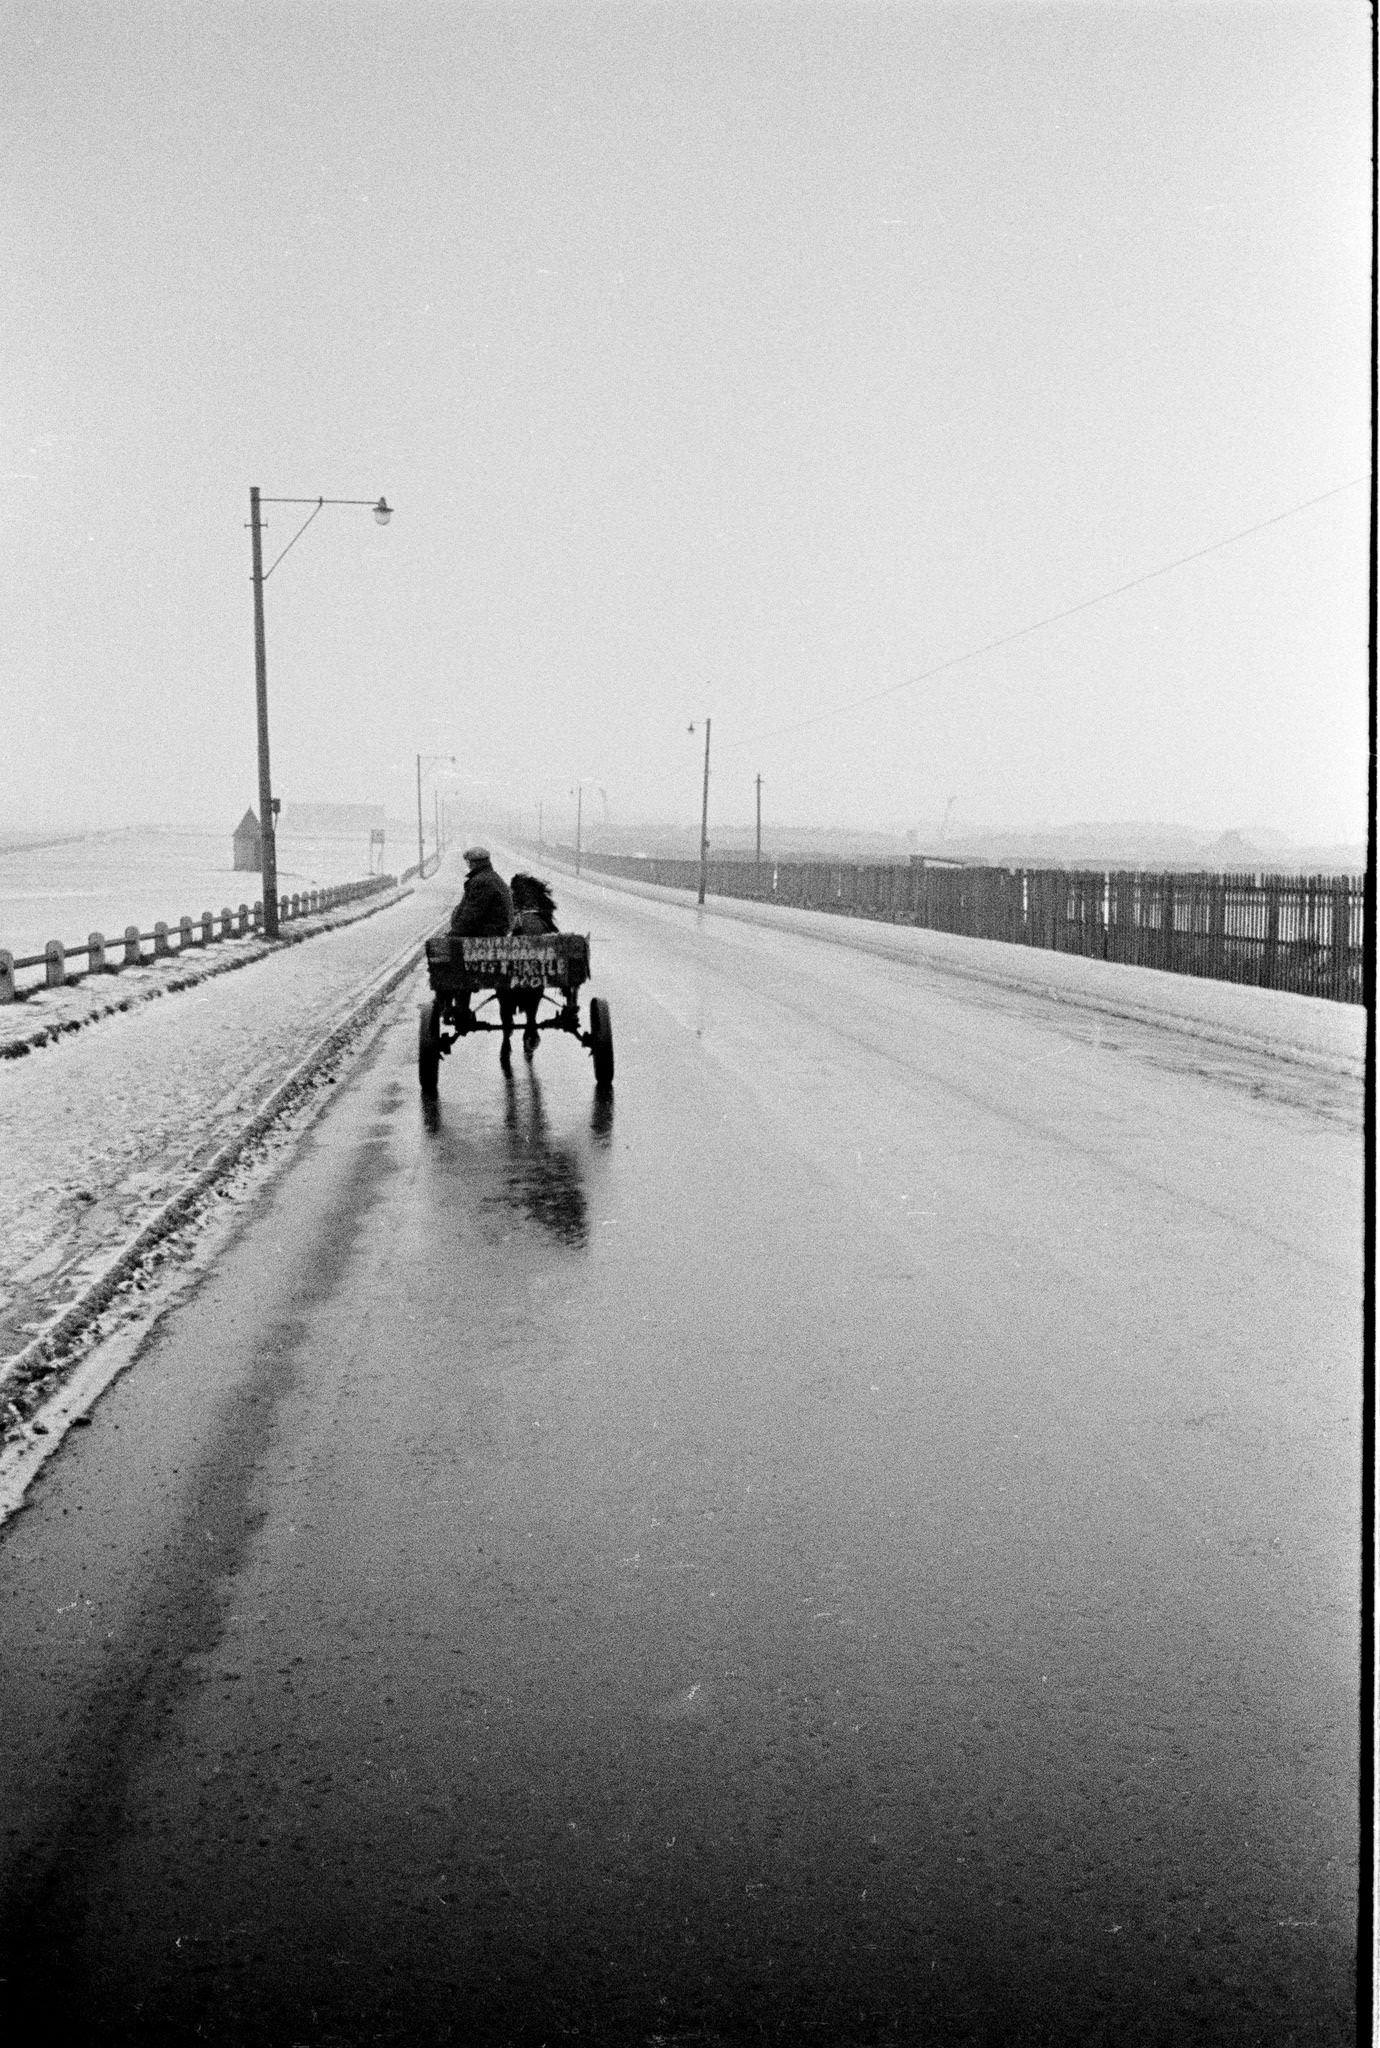 A man rides on a horse drawn cart along the coast road between Seaton Carew beach and Hartlepool in County Durham, northeast England during winter 1962.